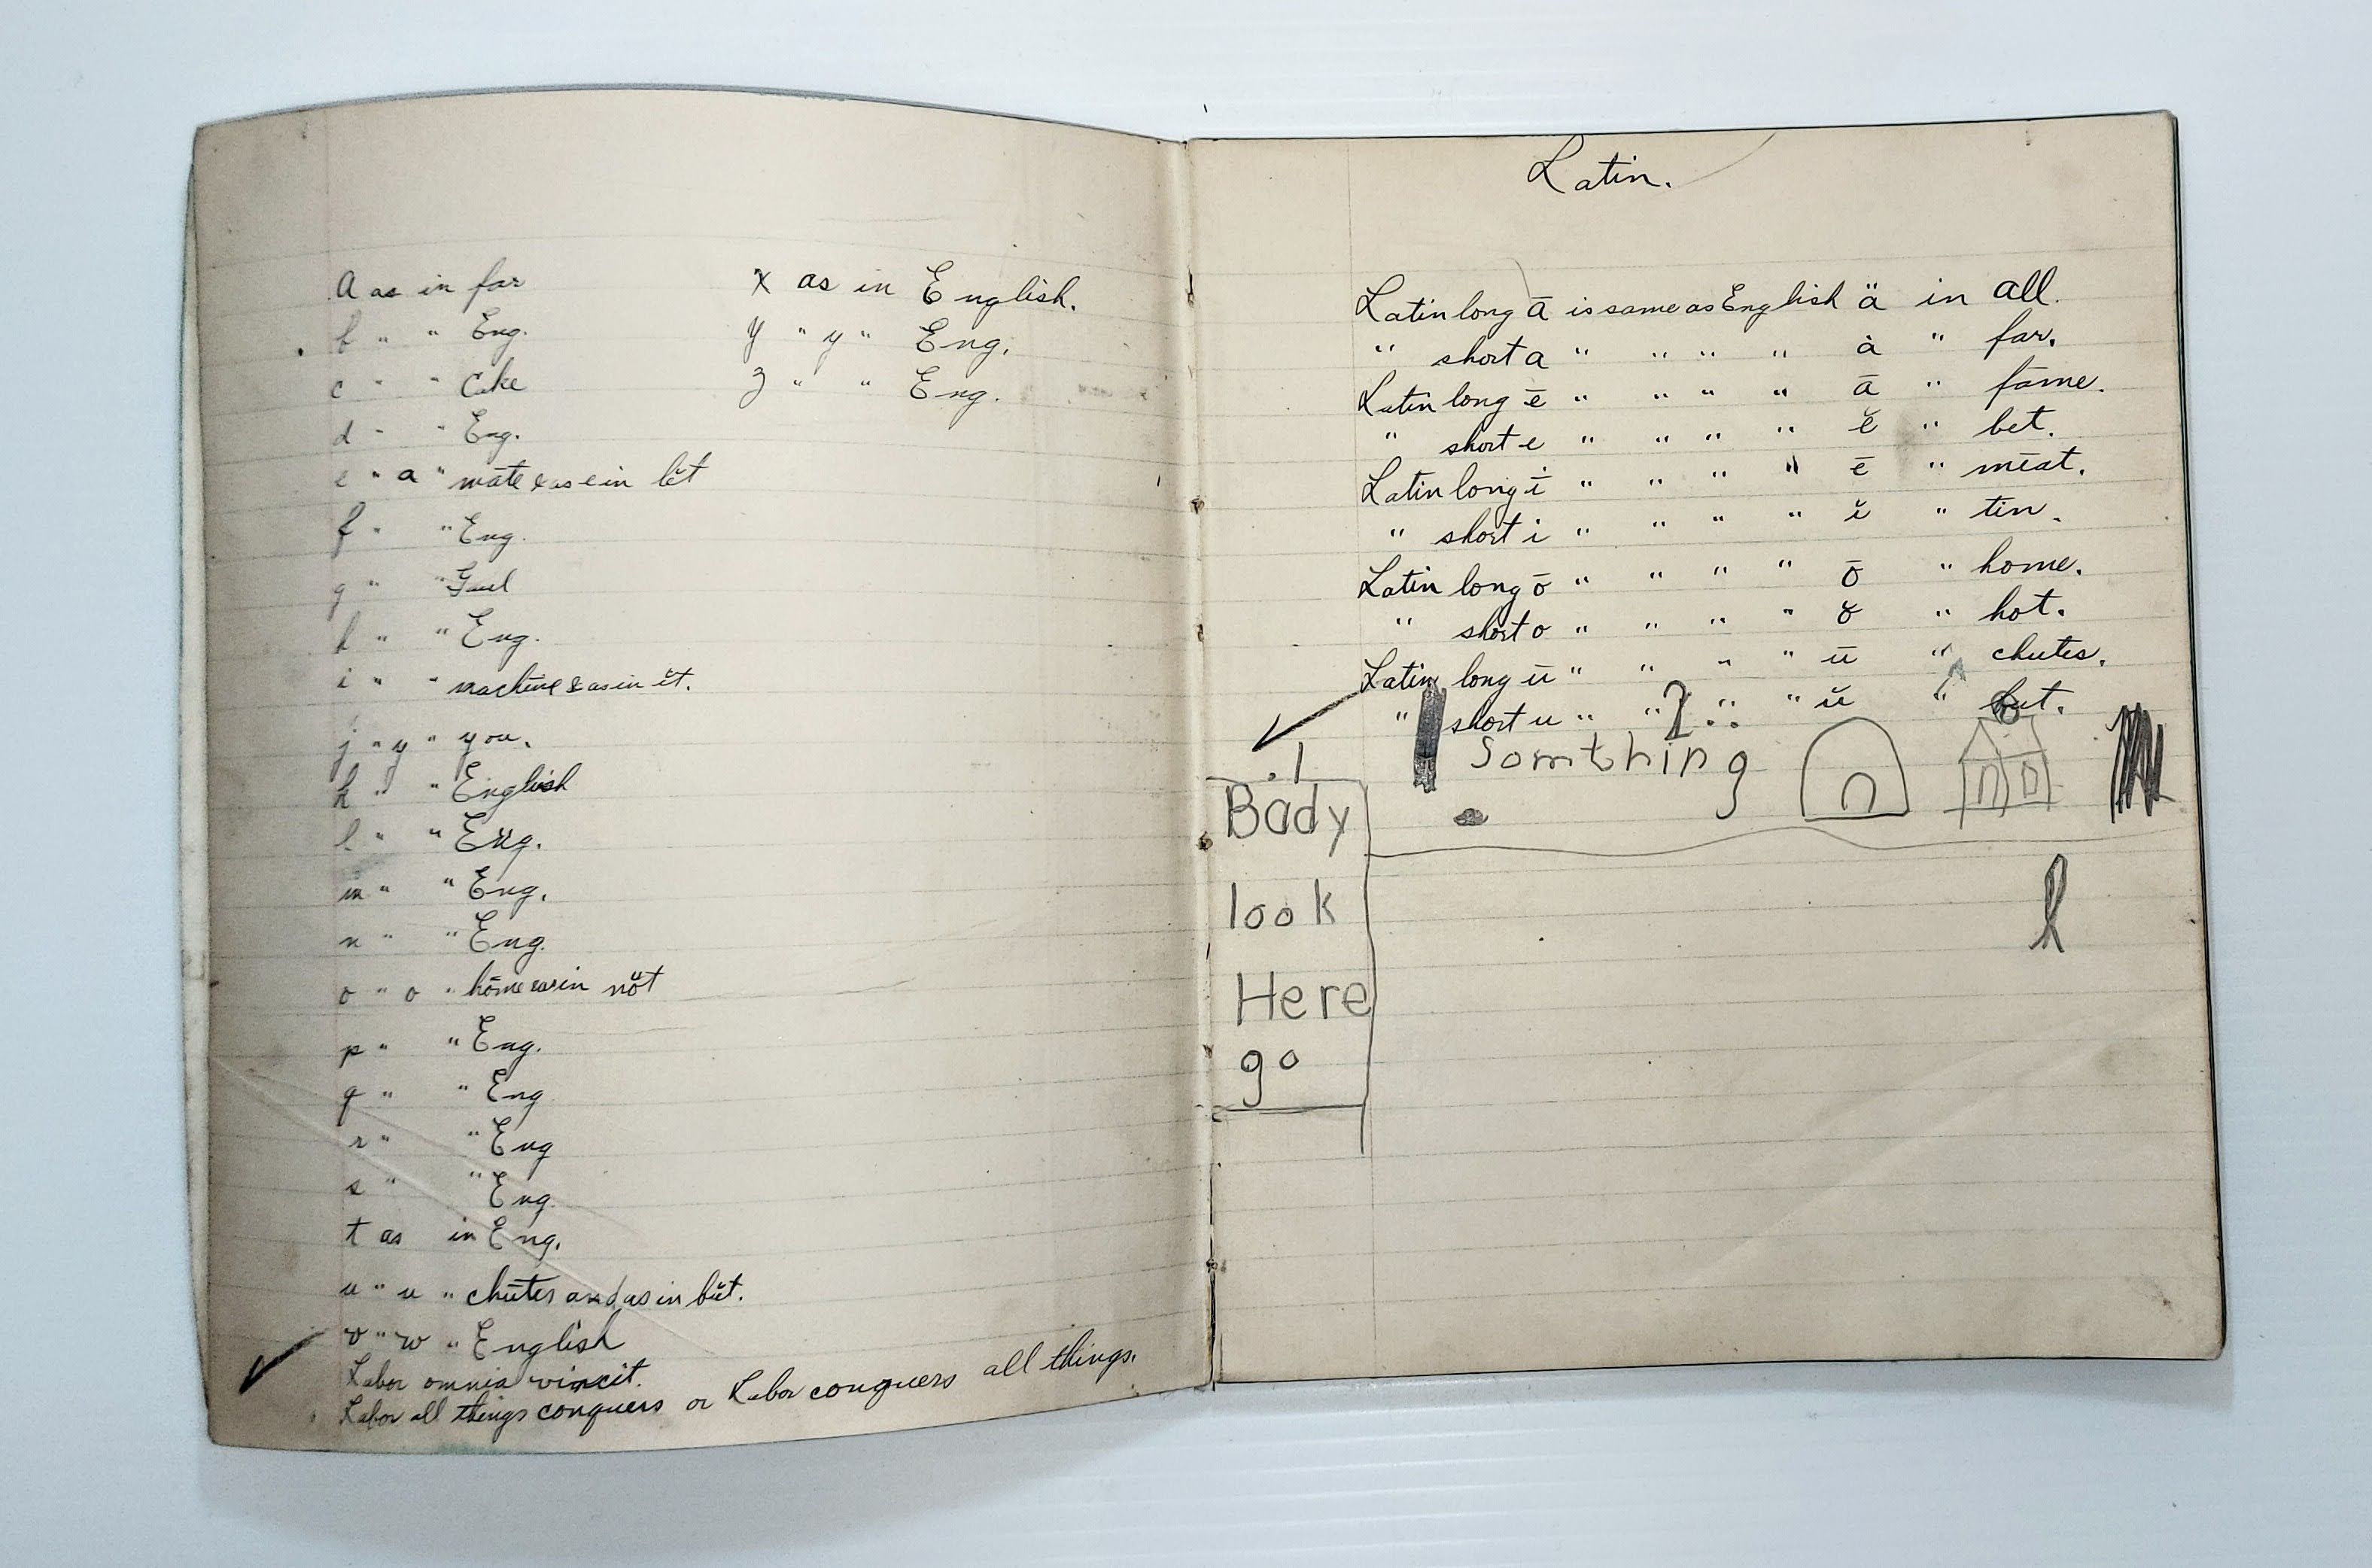 This "Exercise Book" belonged to Walter Letts and contains his homework and writing as he learned latin! Walter came to Fort Vermilion in 1921 with parents Paulina and William Letts and stepbrothers. Walter's interest was piqued by school and this exercise book is evidence of that - detailed lessons in pen with little crossed out. He later became a teacher and helped to establish the first public school in Fort Vermilion. Walter was a committed volunteer of the community and served many years on the Board of trade. The additional drawings (as seen in the picture) likely come from Judy Eek - niece to Walter and Florence.
996.40.99 / Eek, Marilyn